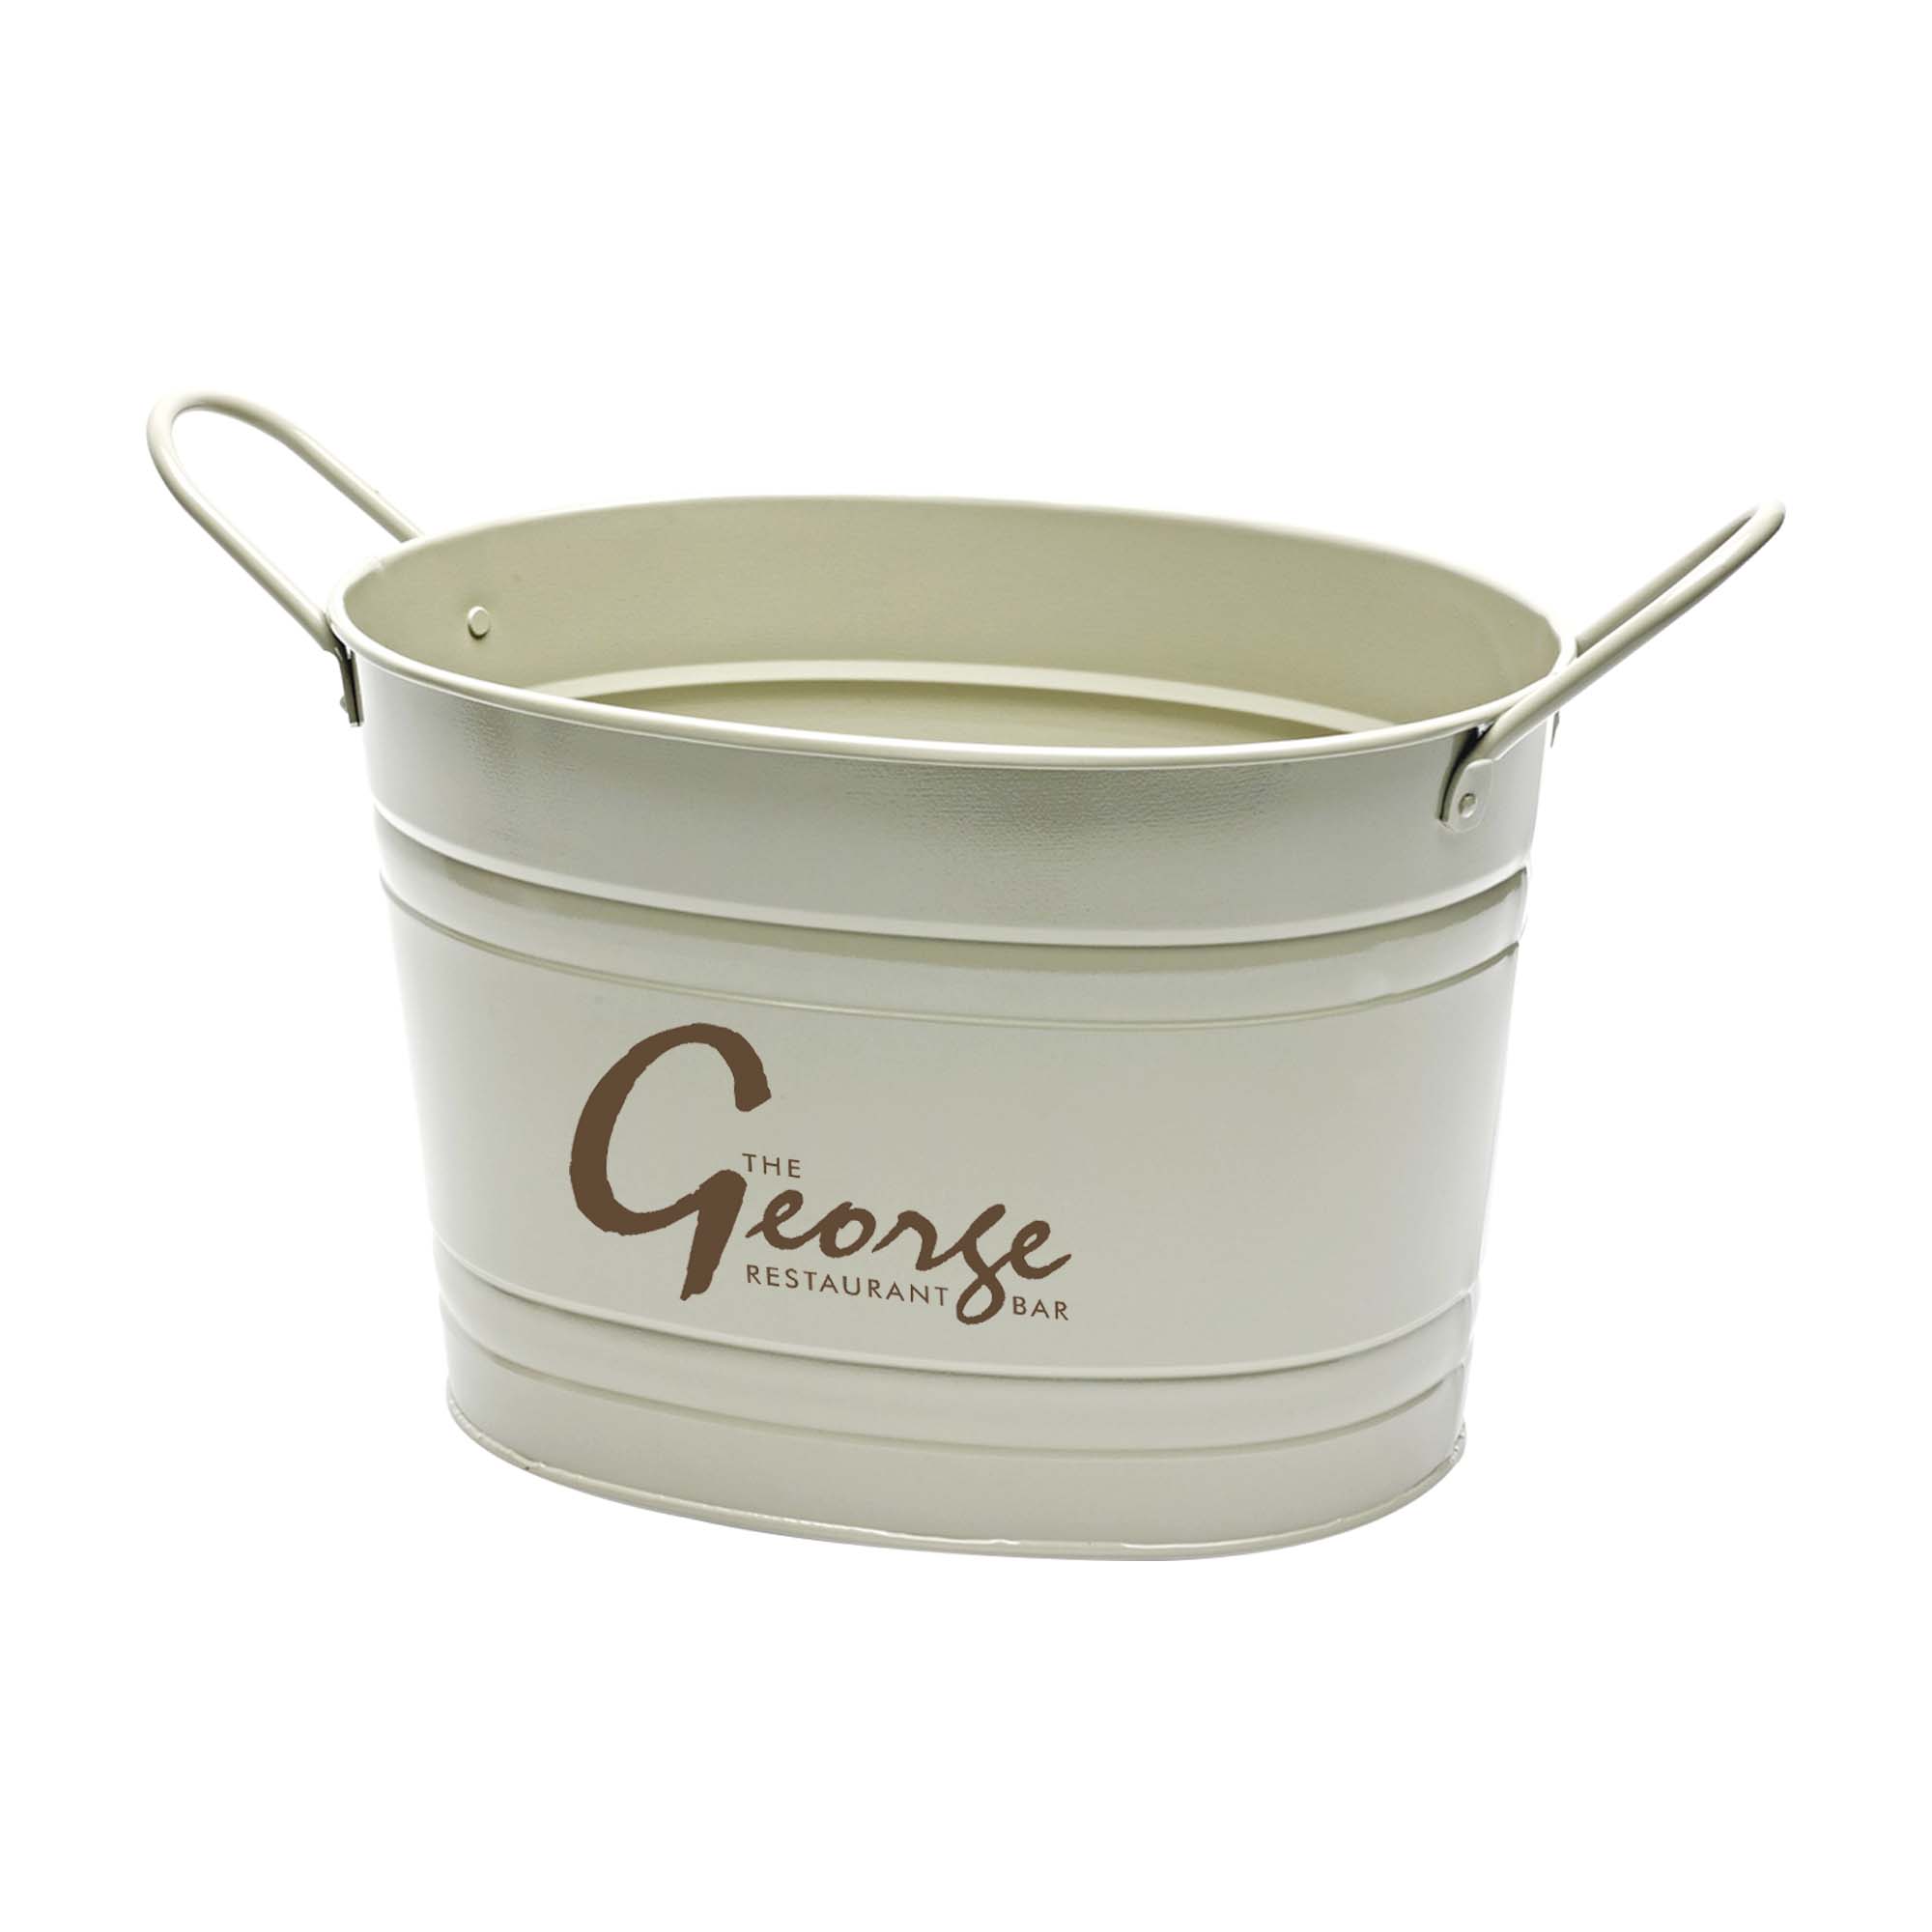 15L LARGE TRADITIONAL GALVANISED STRONG STEEL METAL BUCKET WITH WOODEN  HANDLE 5017403086345